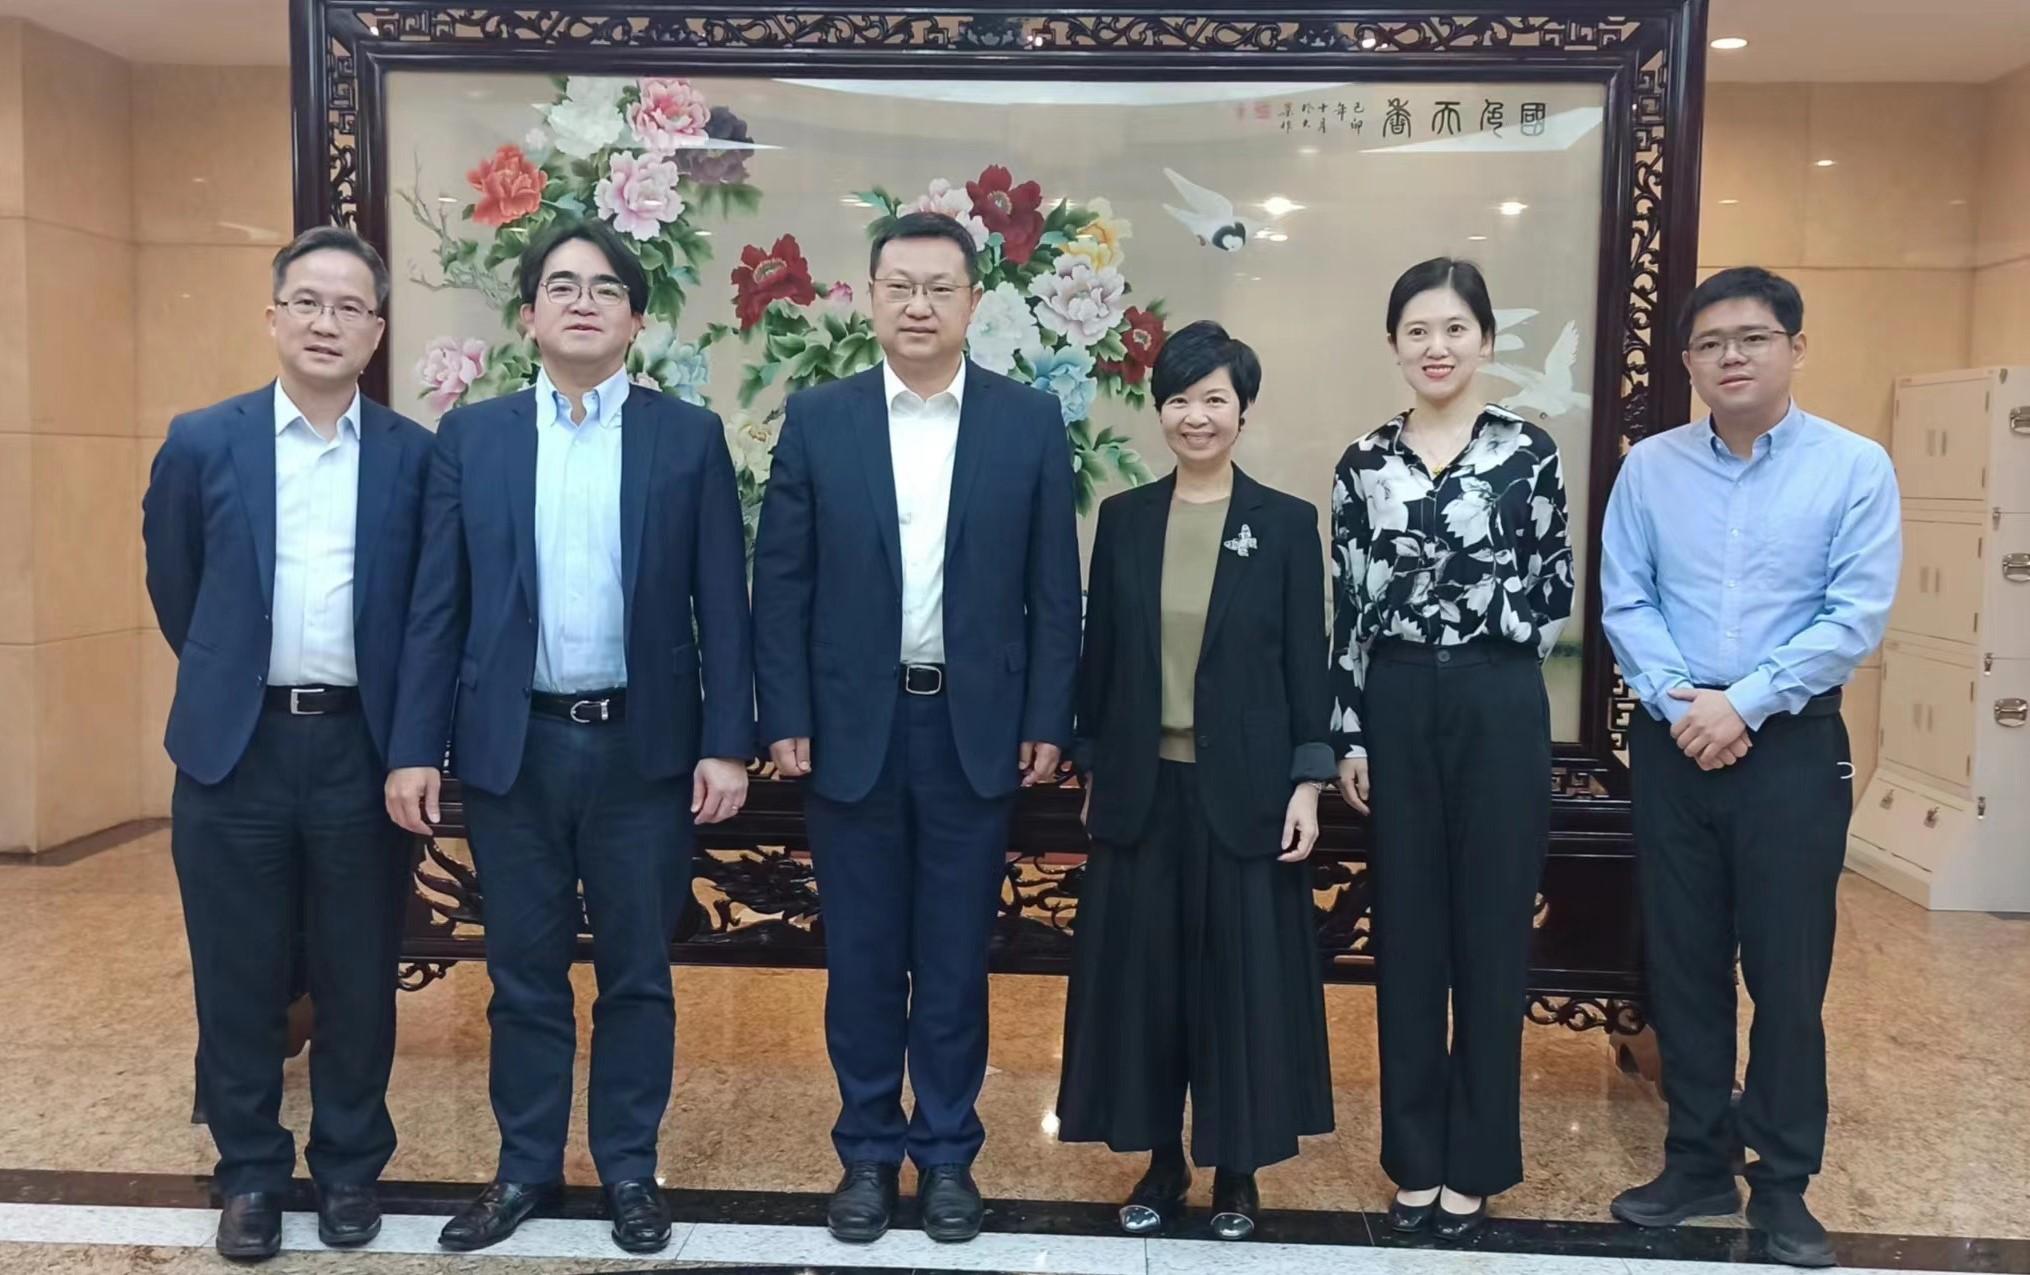 The Secretary for Housing, Ms Winnie Ho, was on the third day of her visit to Beijing today (June 1) and called on the National Development and Reform Commission. Photo shows Ms Ho (third right) and the Deputy Director-General of the International Cooperation Department and Director General of International Affairs Department, Office of the Leading Group for Promoting the Belt and Road Initiative, Mr Pan Jiang (third left).